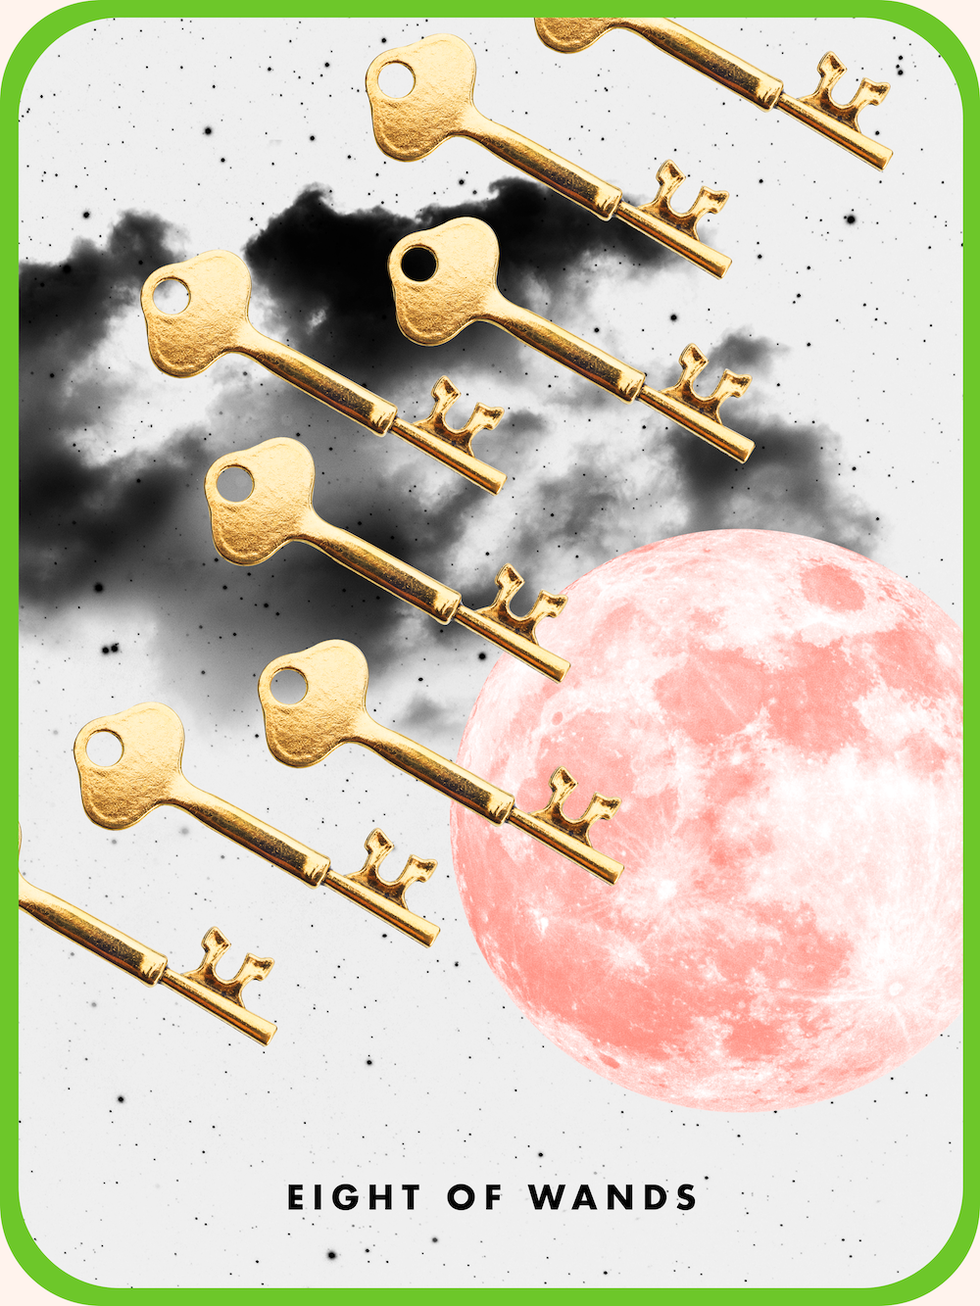 the tarot card the eight of wands, showing eight golden keys floating in the sky over a moon